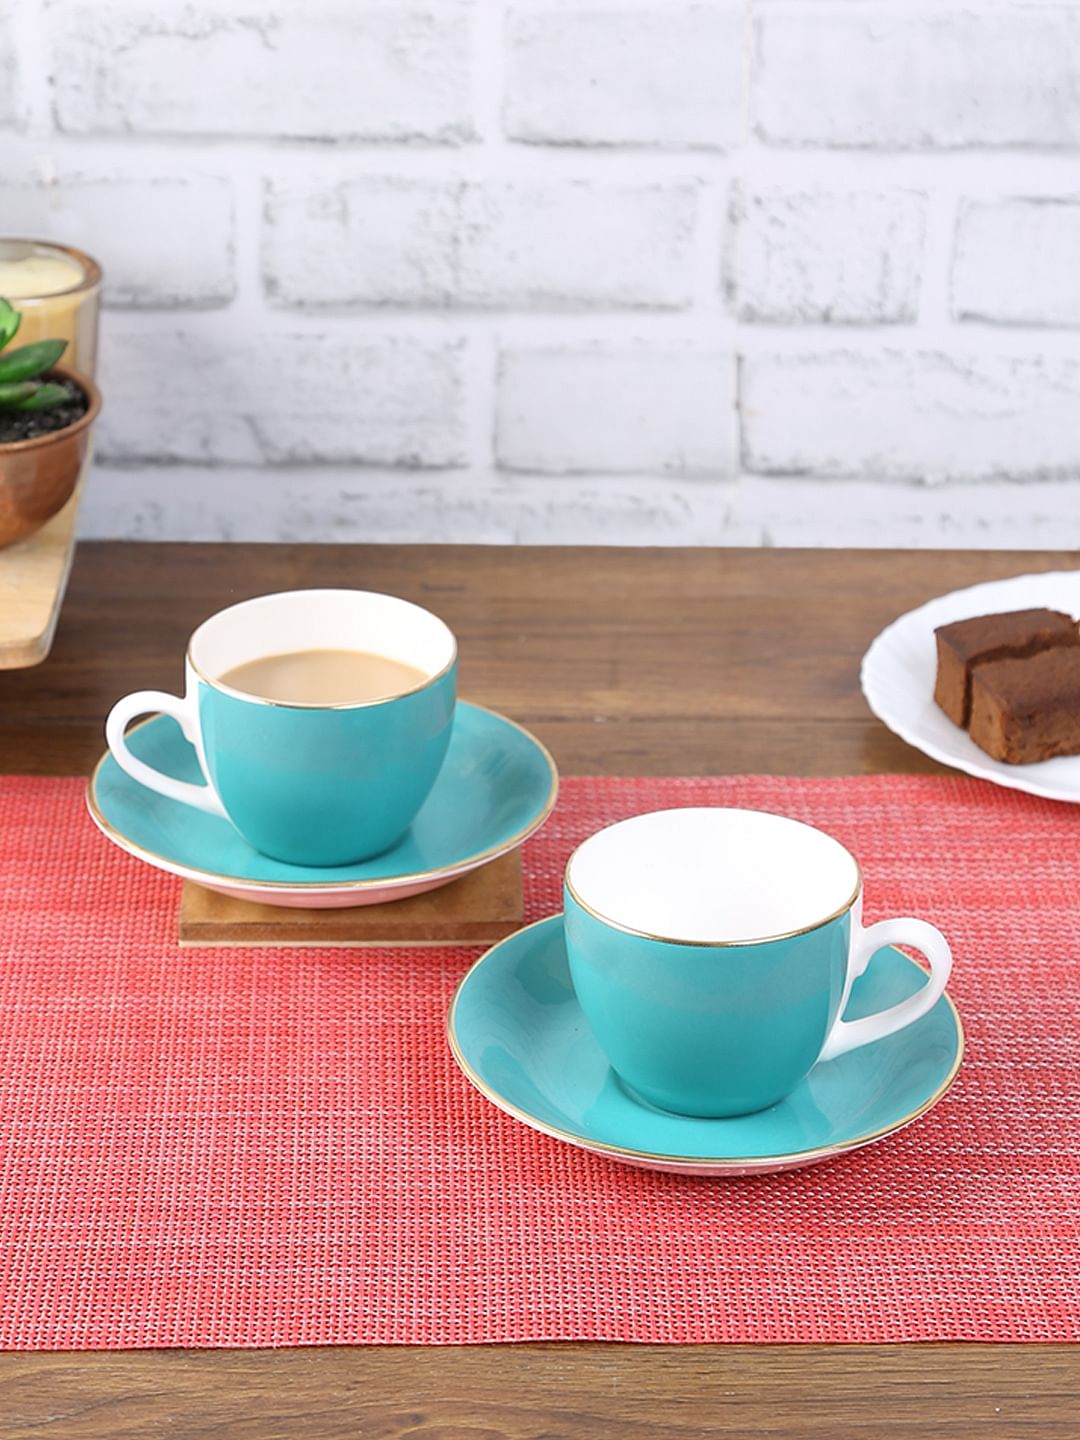 Bahamas Ceramic Cup & Saucer Set Of 12 220 Ml in Teal Colour